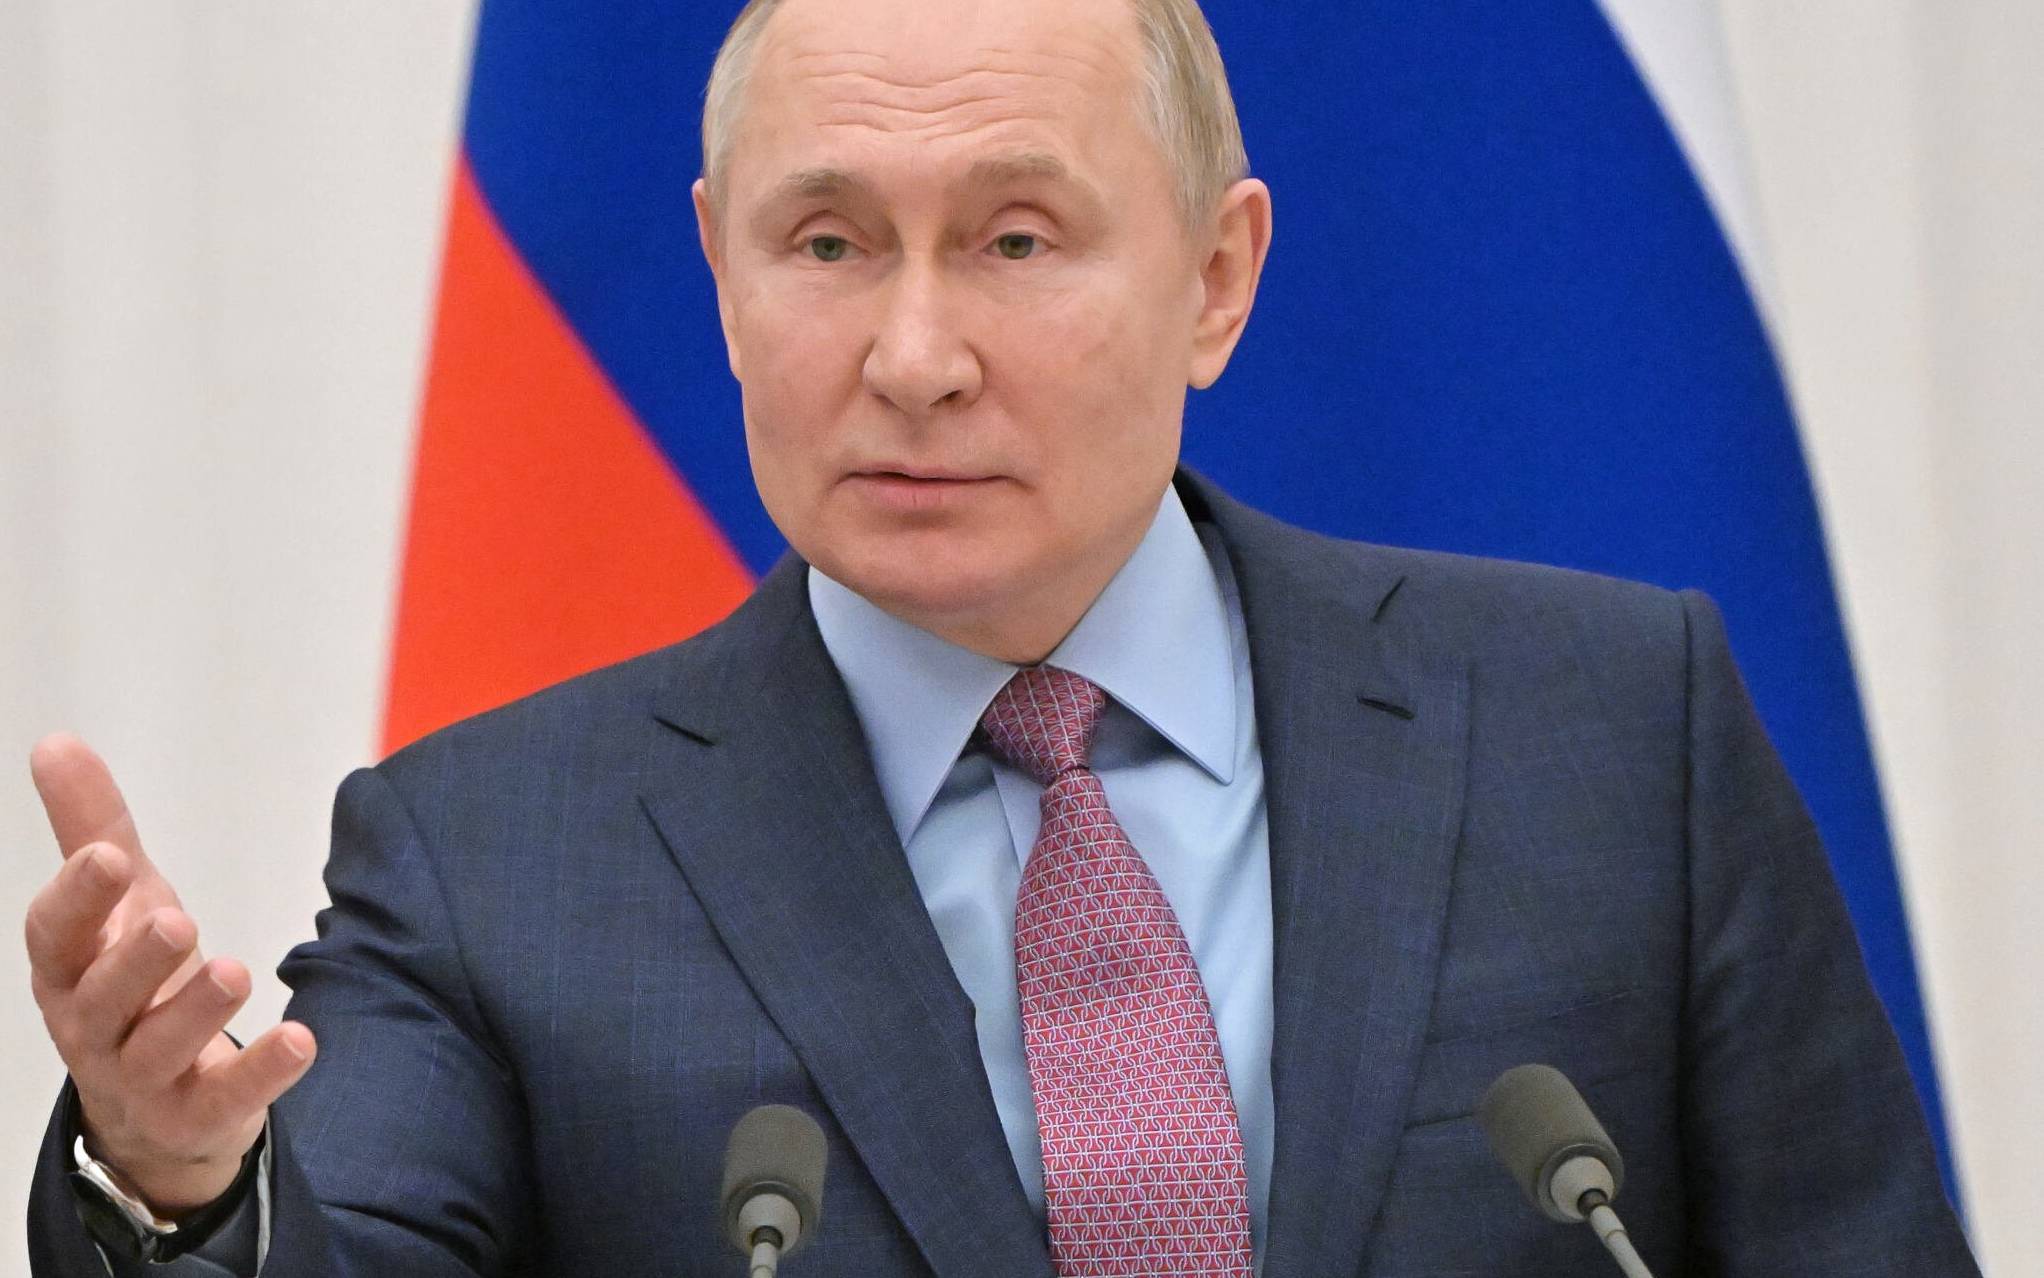 Russia's President Vladimir Putin gestures as he speaks during a press conference with his Belarus counterpart, following their talks at the Kremlin in Moscow on February 18, 2022. - Vladimir Putin said on February 18, 2022 that the situation in conflict-hit eastern Ukraine was worsening, as the West accuses him of planning an imminent attack on the country. (Photo by Sergei GUNEYEV / Sputnik / AFP)